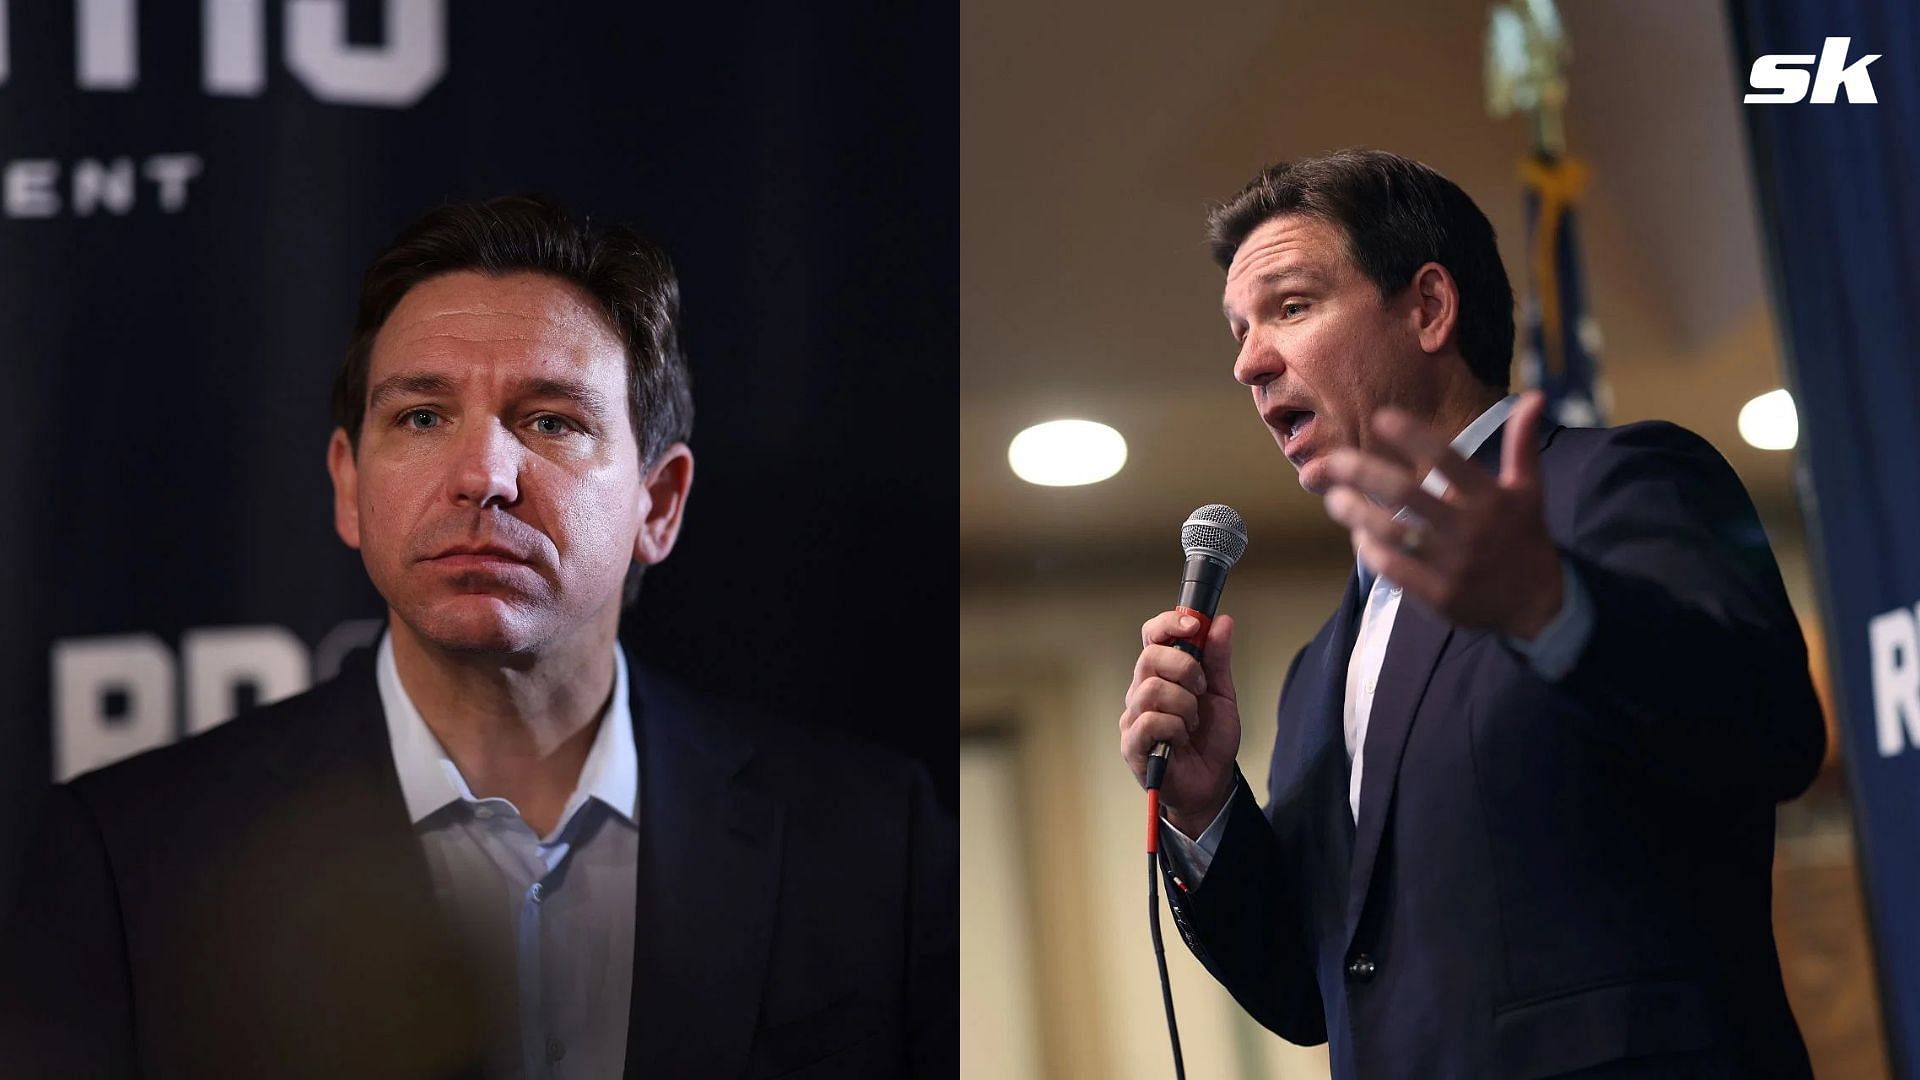 When MLB fan and Florida governor Ron DeSantis faced backlash for eccentric comment on basketball players